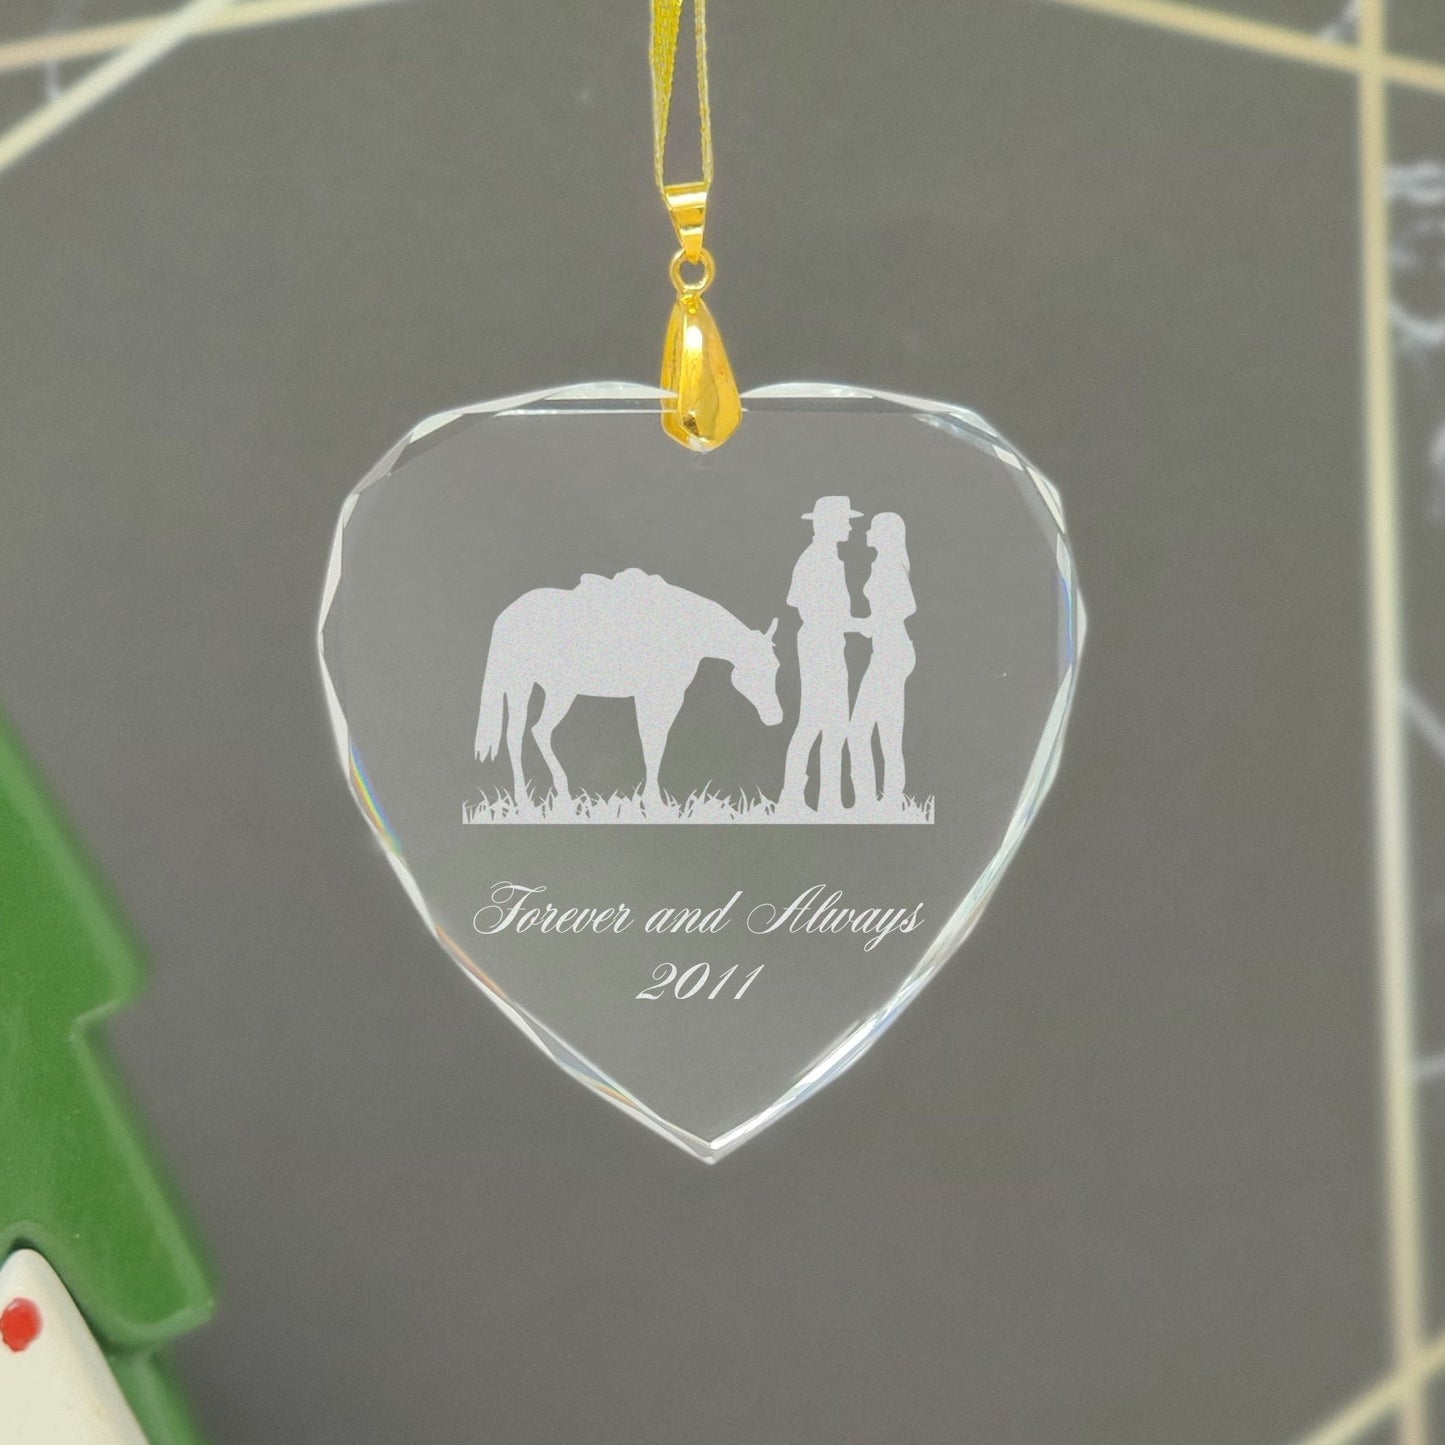 LaserGram Christmas Ornament, Flat Bed Tow Truck, Personalized Engraving Included (Heart Shape)